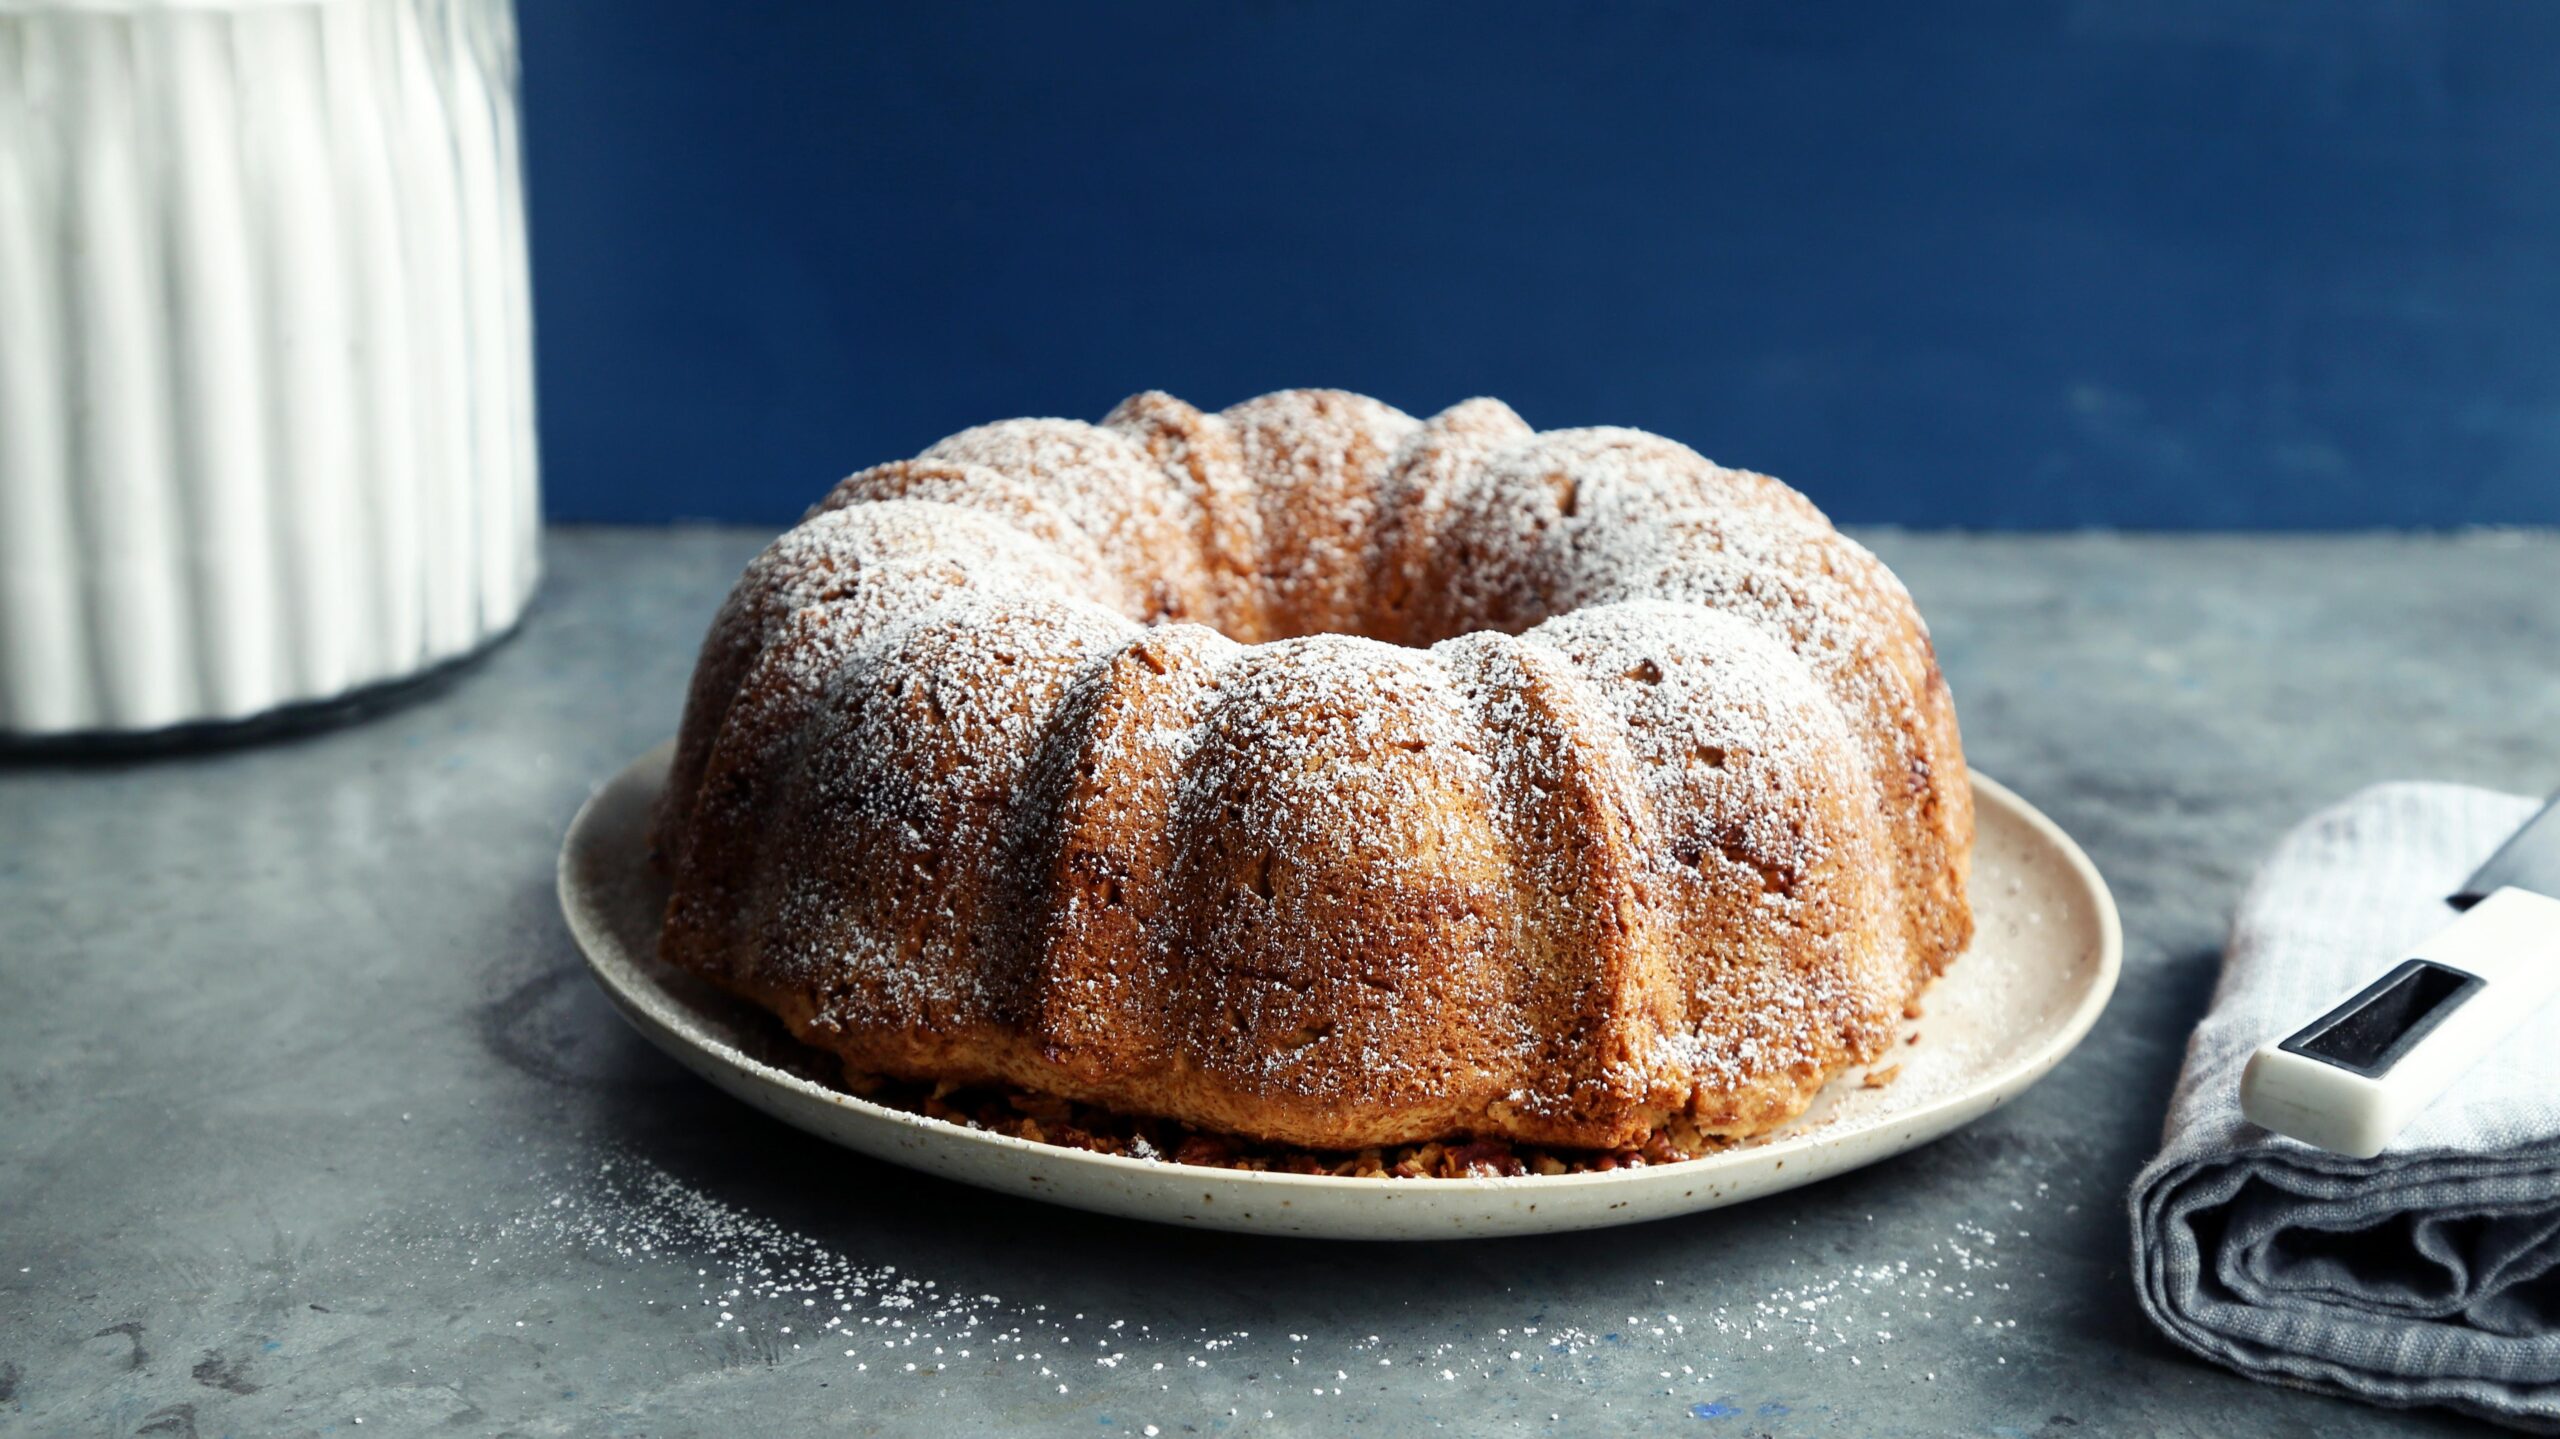  Coffee cake can be gluten-free and still delicious